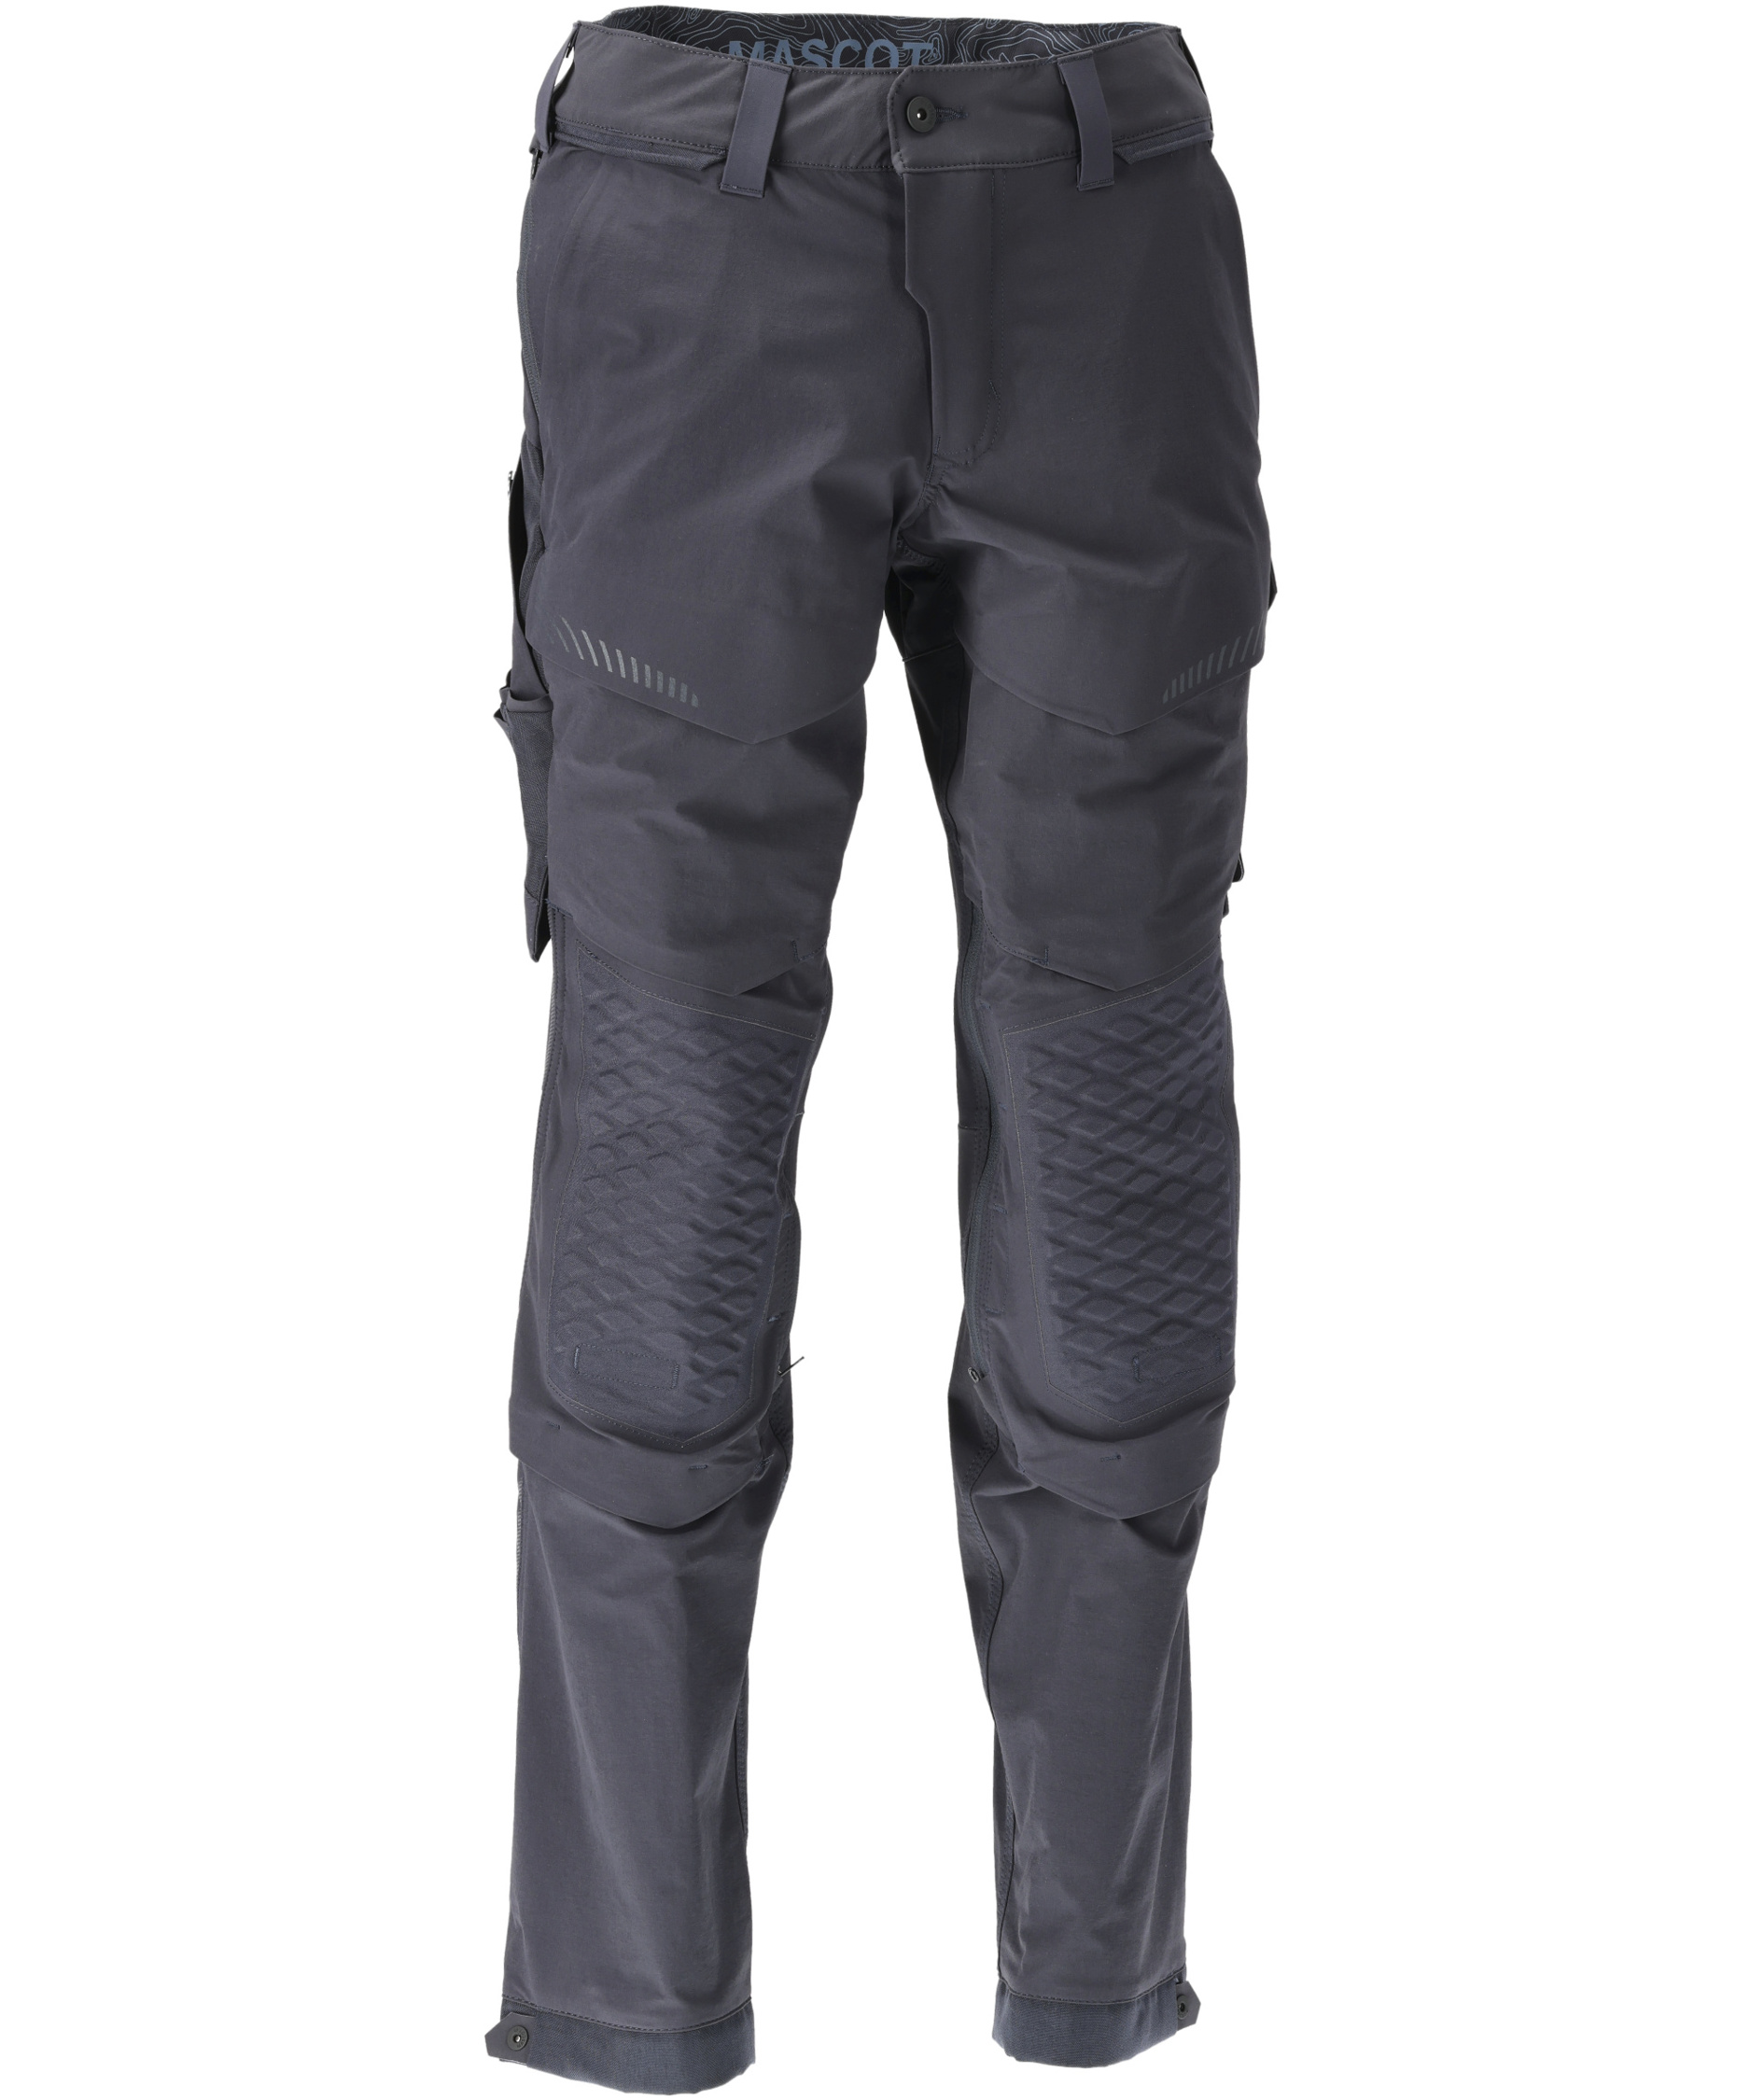 MASCOT Houston Trousers with Knee Pad Pockets - MJ Scannell Safety